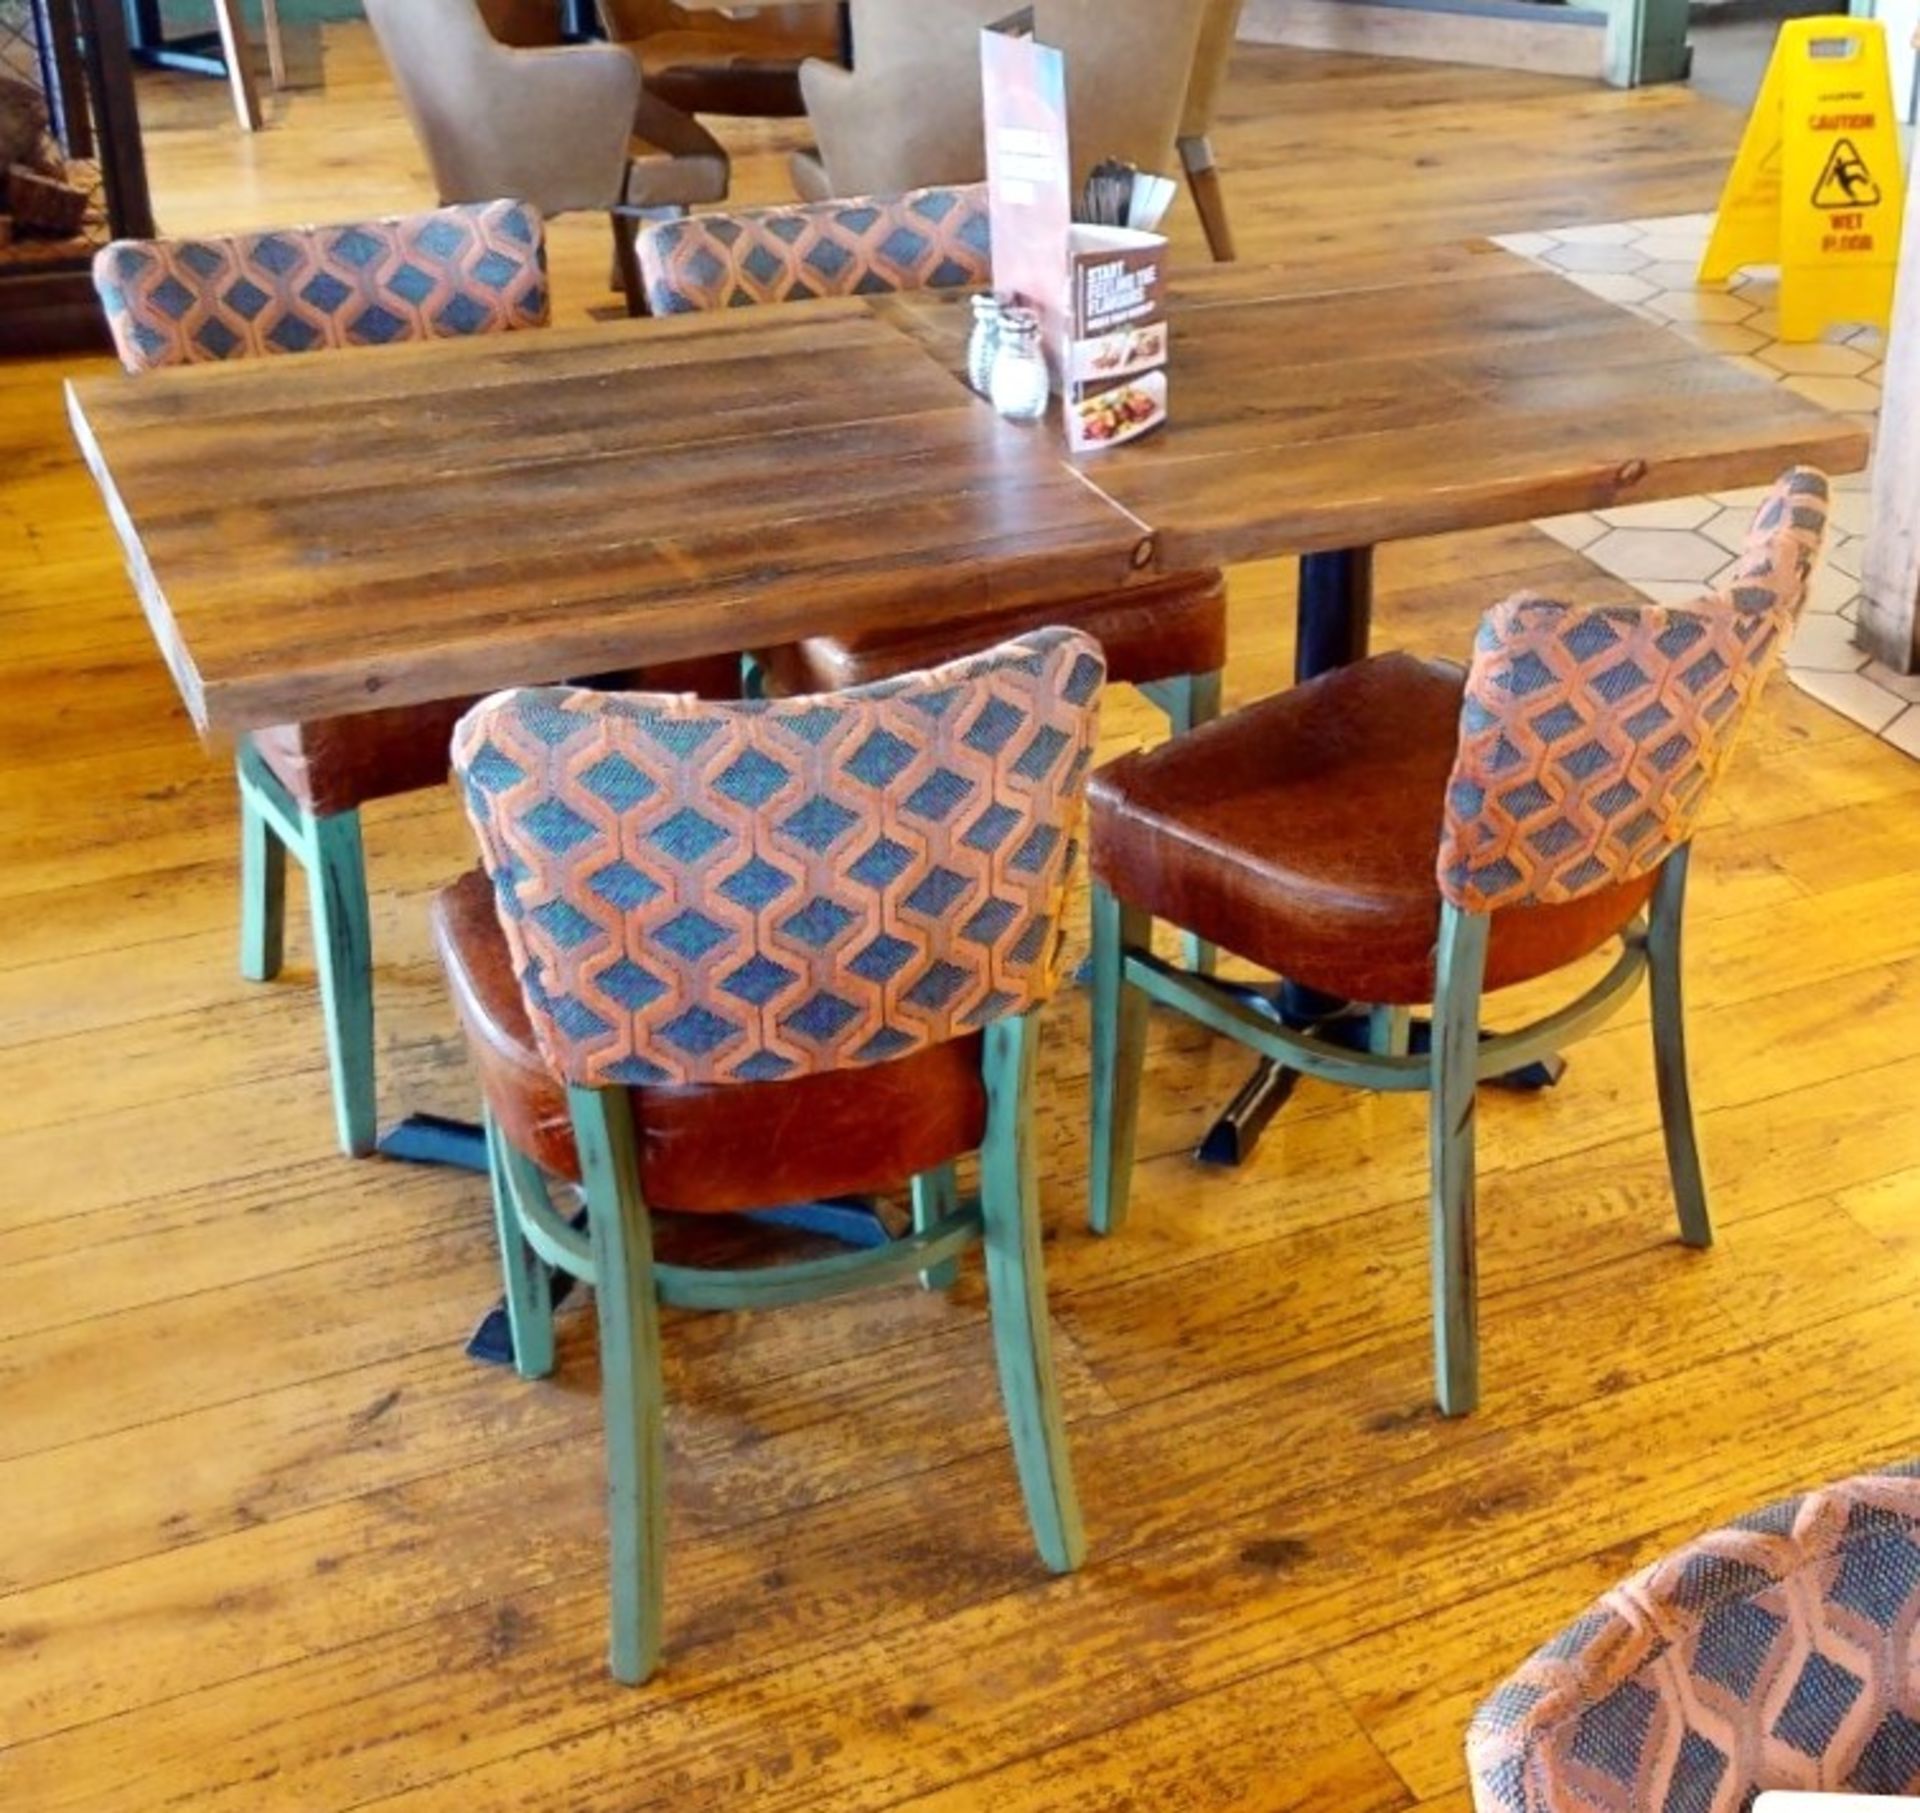 8 x Commercial Restaurant Dining Chairs Featuring Tan Leather Seats, Upholstered Back Rests and - Image 5 of 9